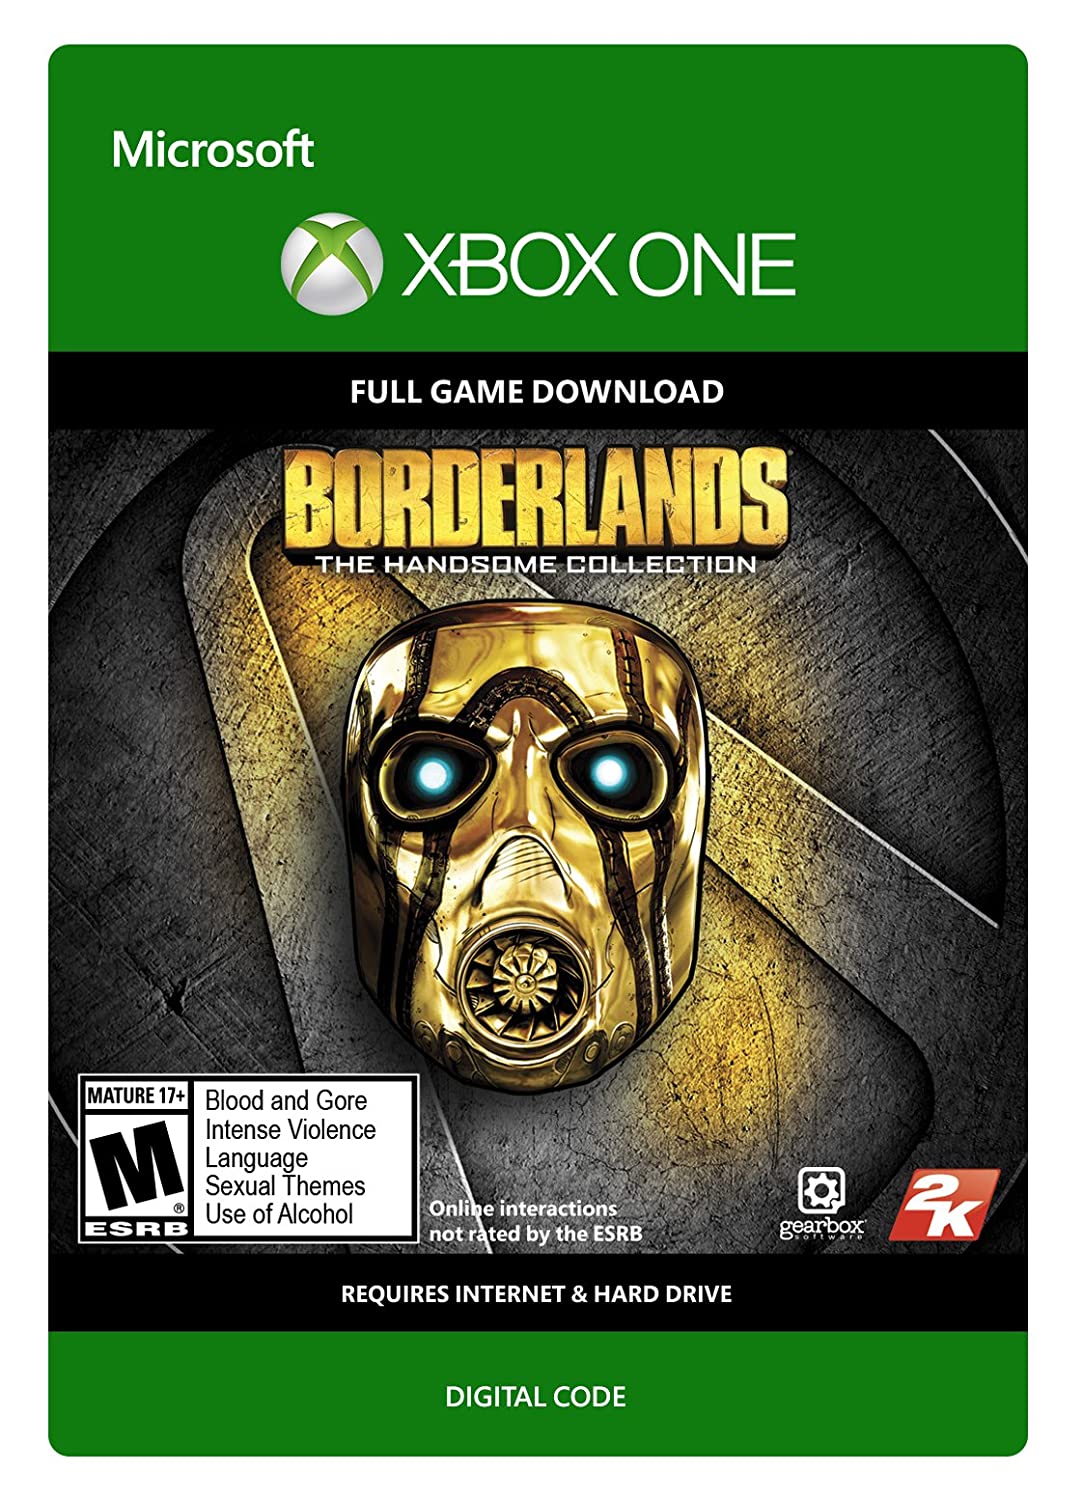 The handsome collection. Borderlands the handsome collection Xbox. Borderlands Xbox one. Borderlands: the handsome collection Xbox one. Borderlands 2 Xbox one.